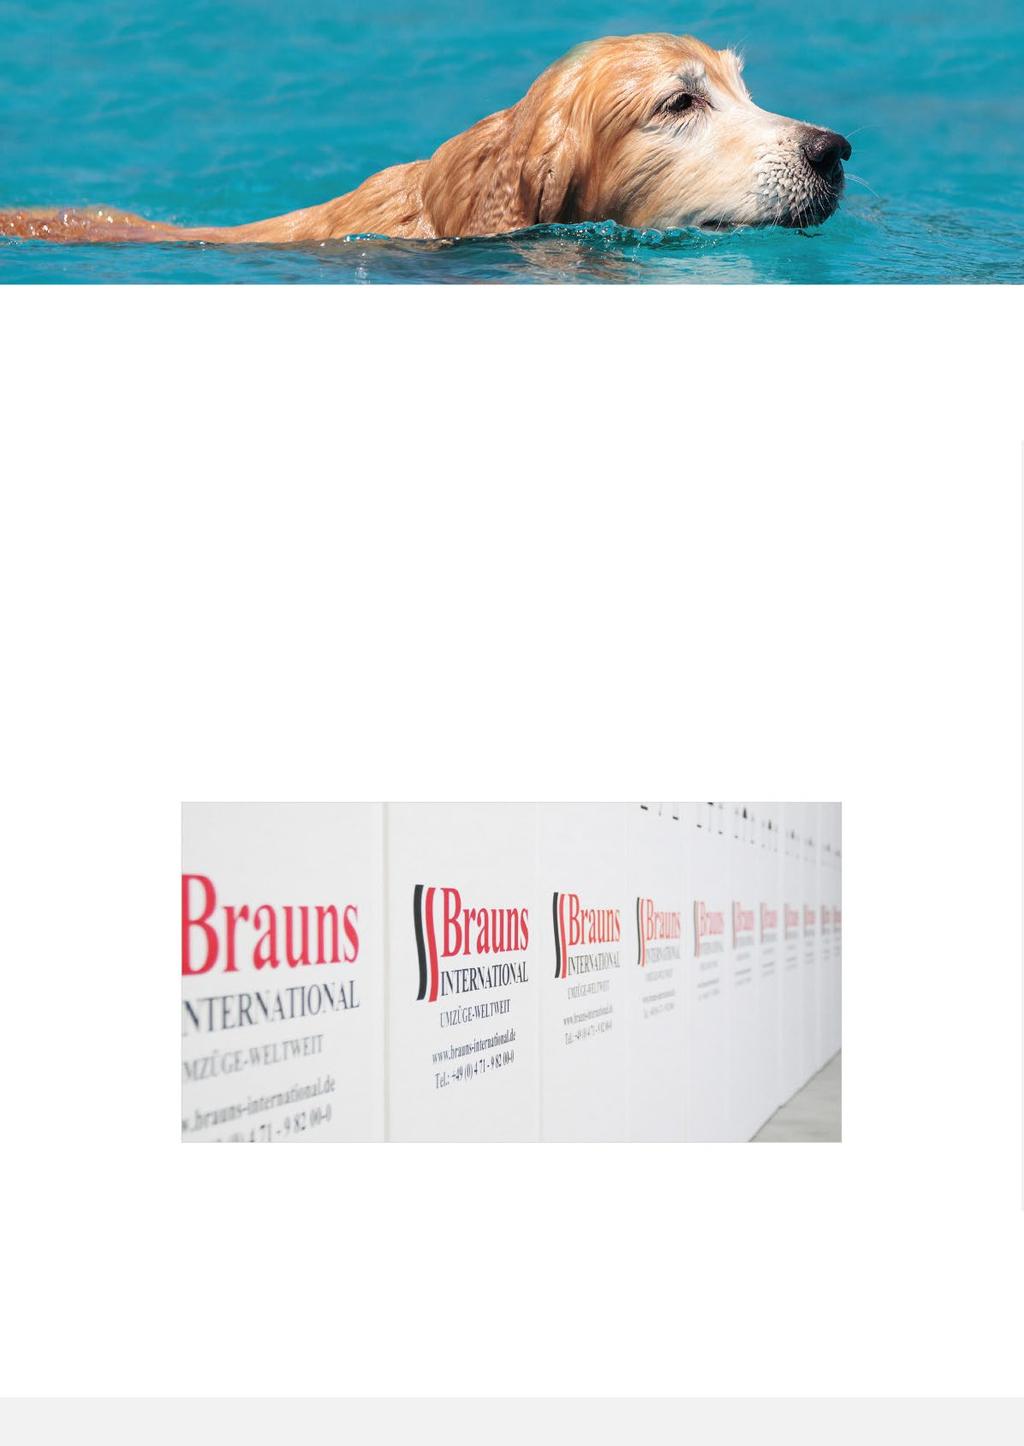 ABOUT BRAUNS INTERNATIONAL Brauns INTERNATIONAL are a global provider of removal and relocation services.